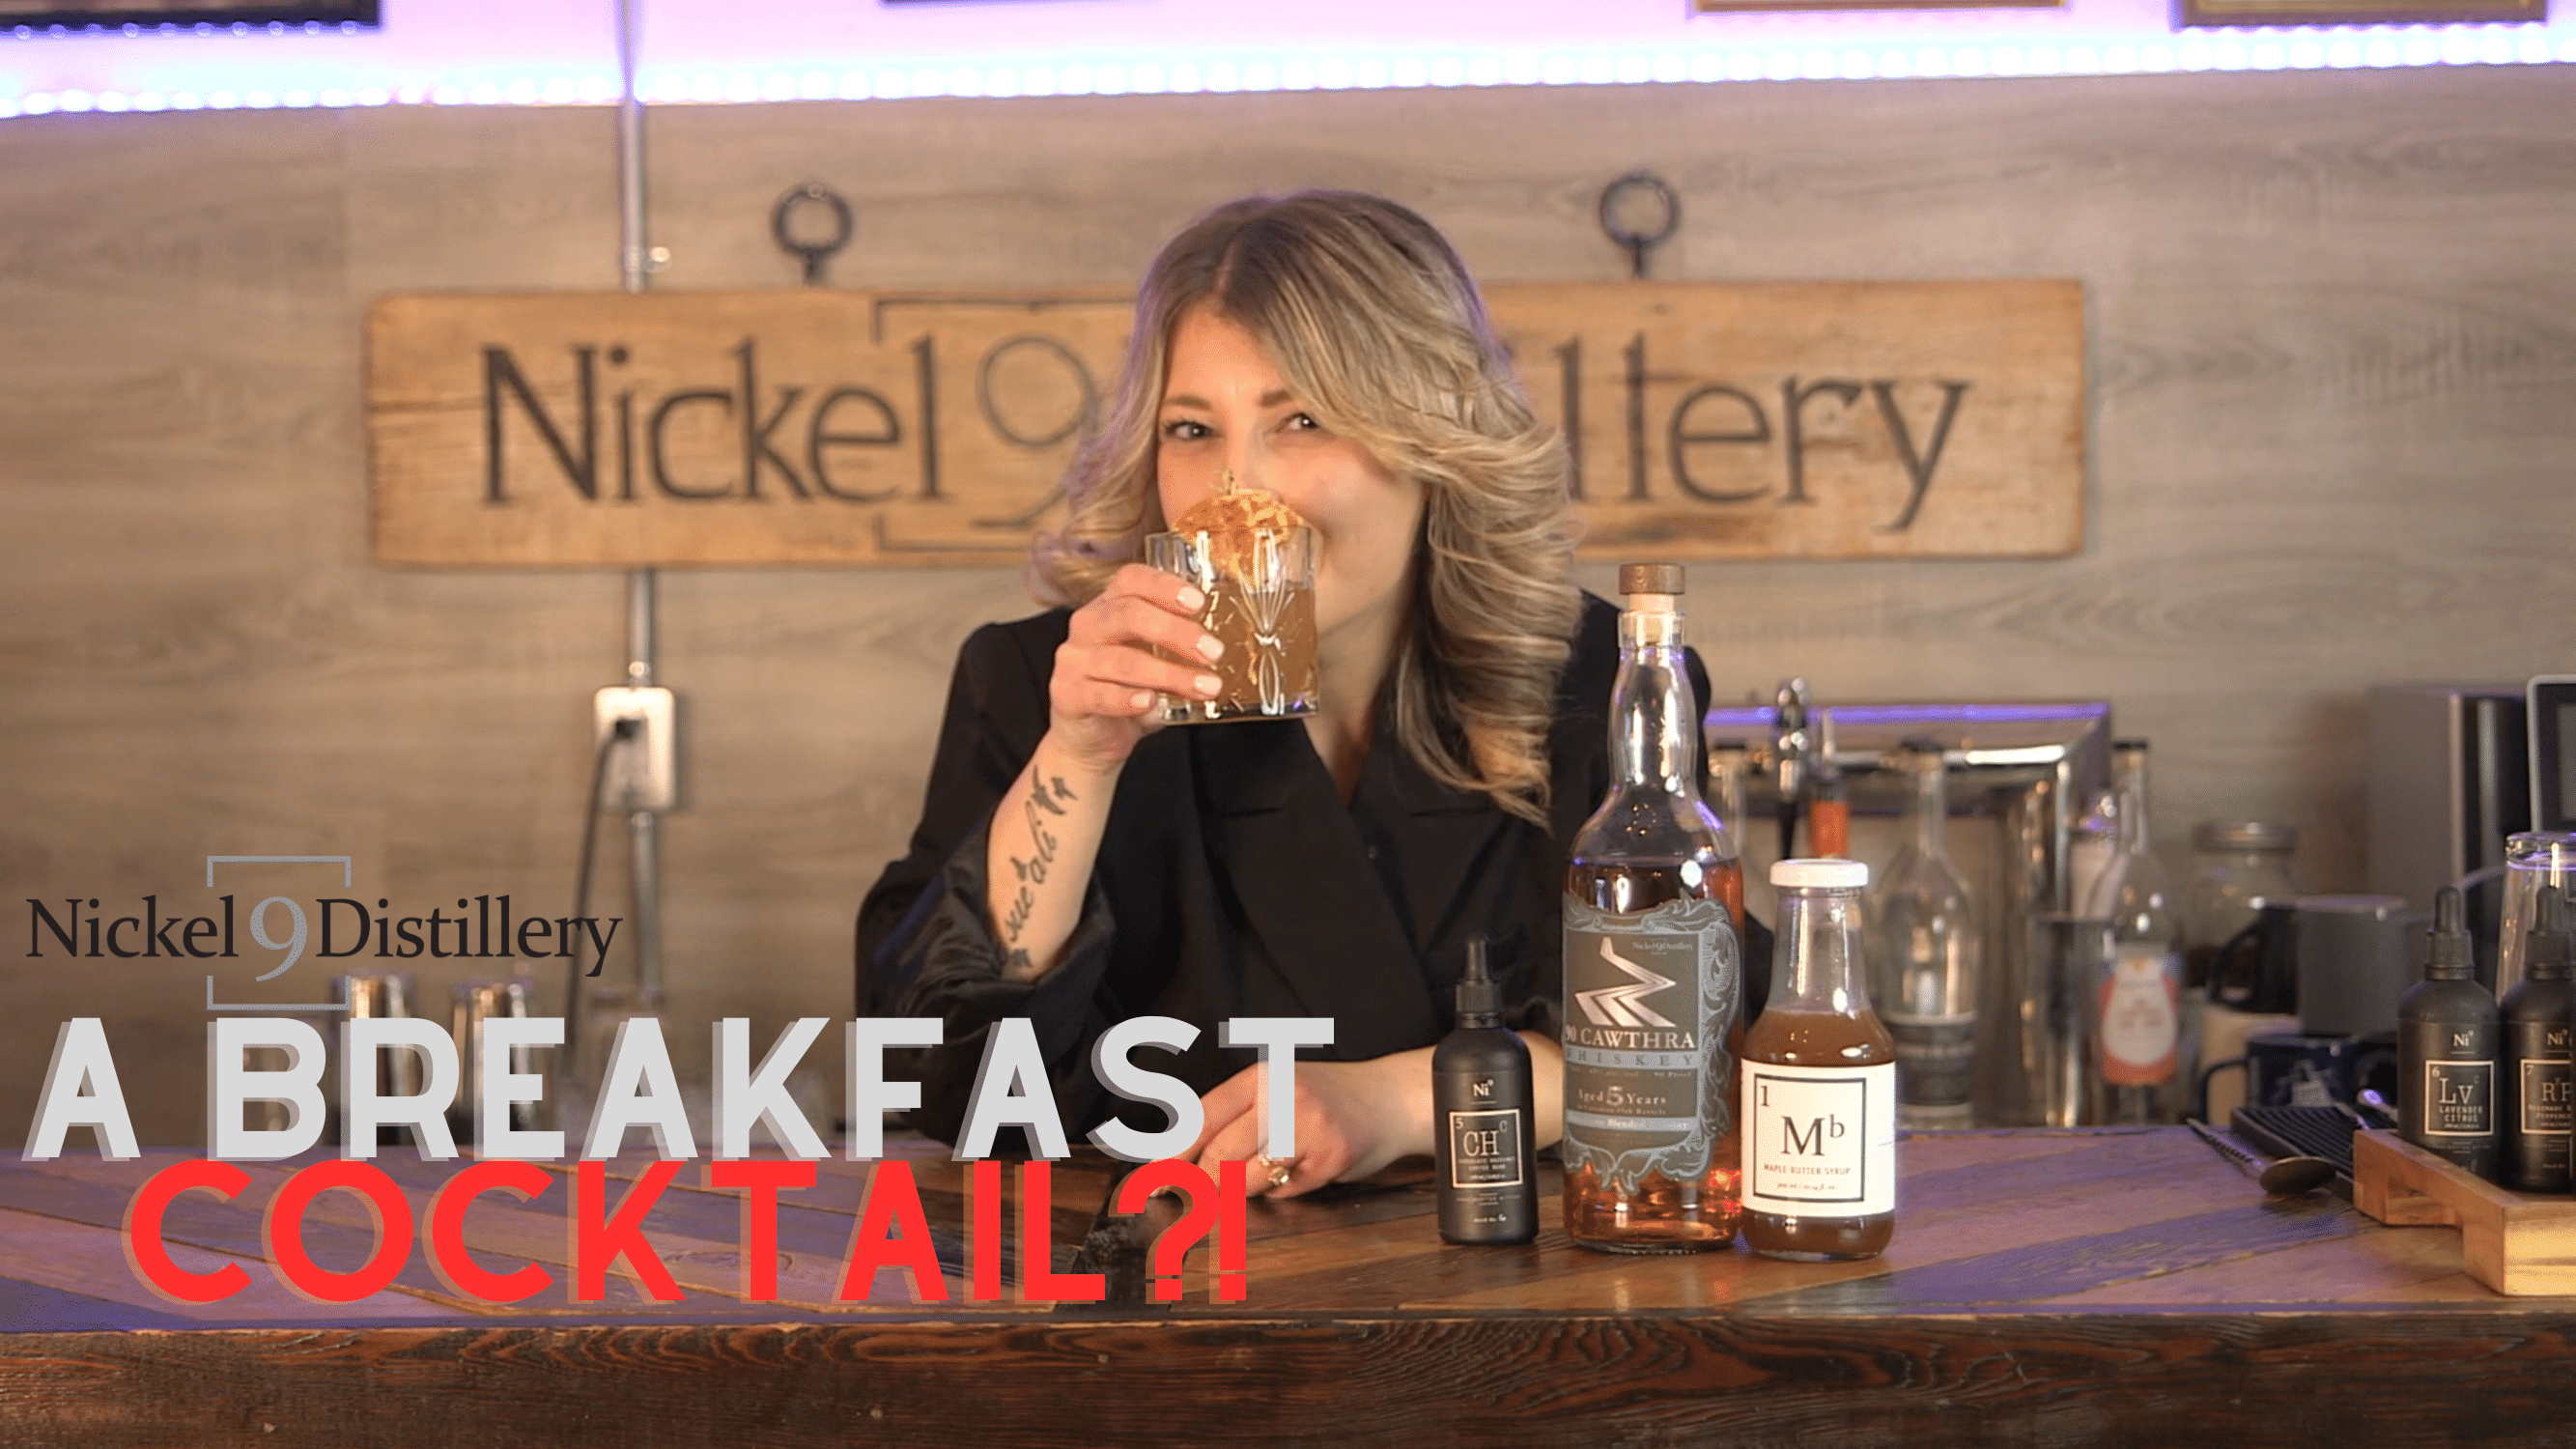 Load video: Breakfast old fashioned cocktail kit at Nickel 9 Distillery